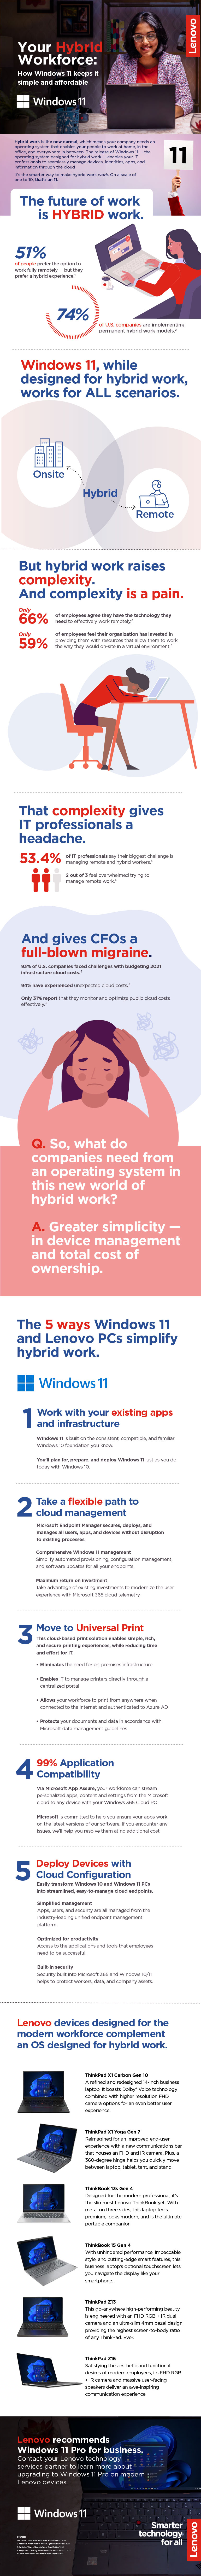 Your Hybrid Workforce: How Windows 11 Keeps It Affordable and Simple infographic as translated below.